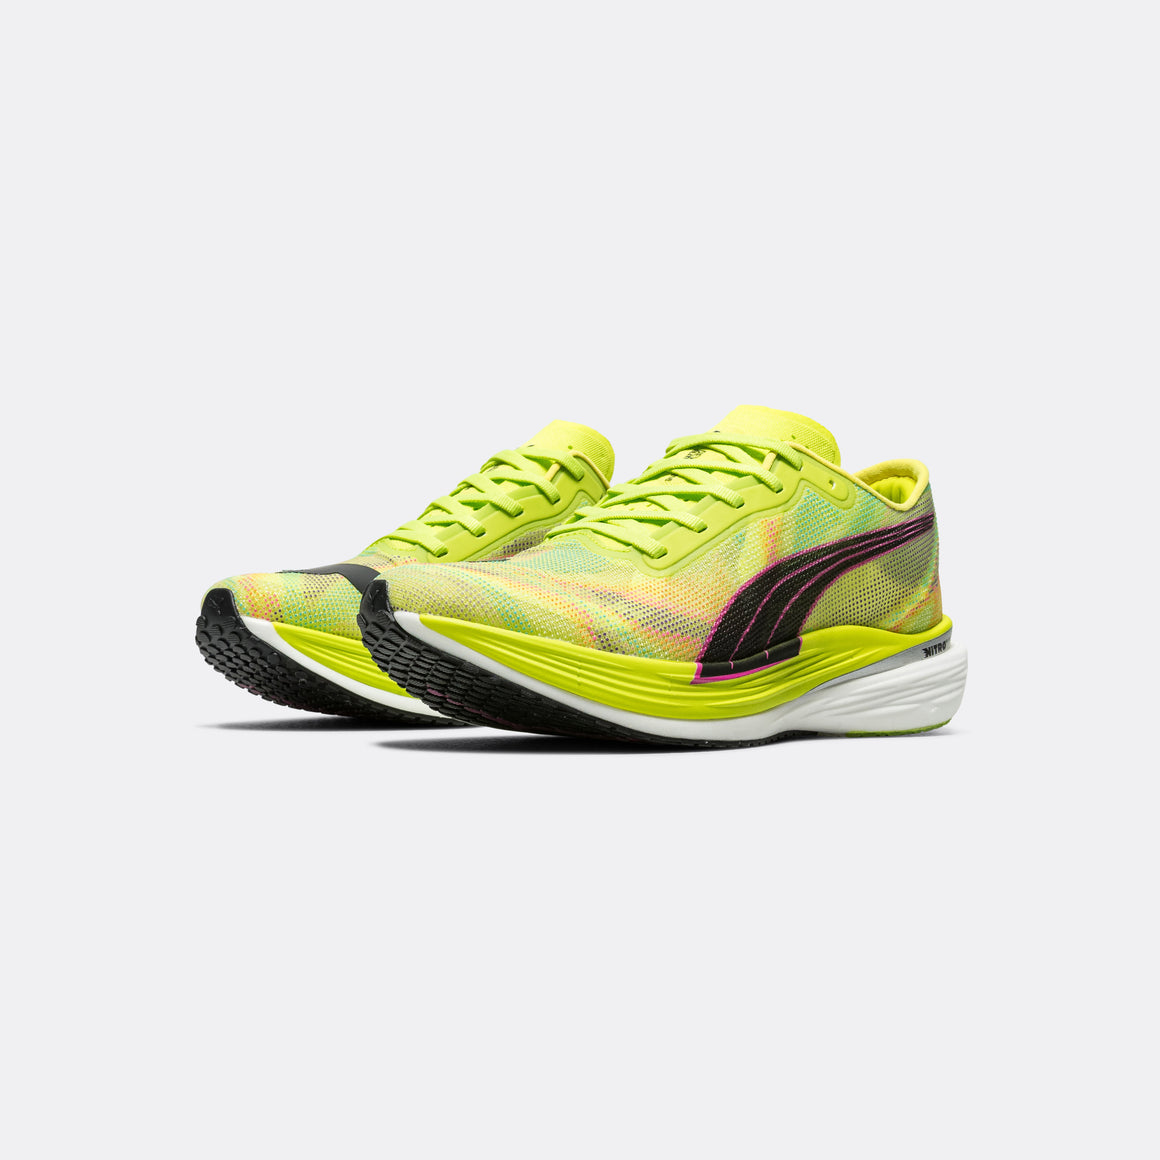 Puma - Mens Deviate NITRO Elite 2 - Psychedelic Rush/Lime - Up There Athletics